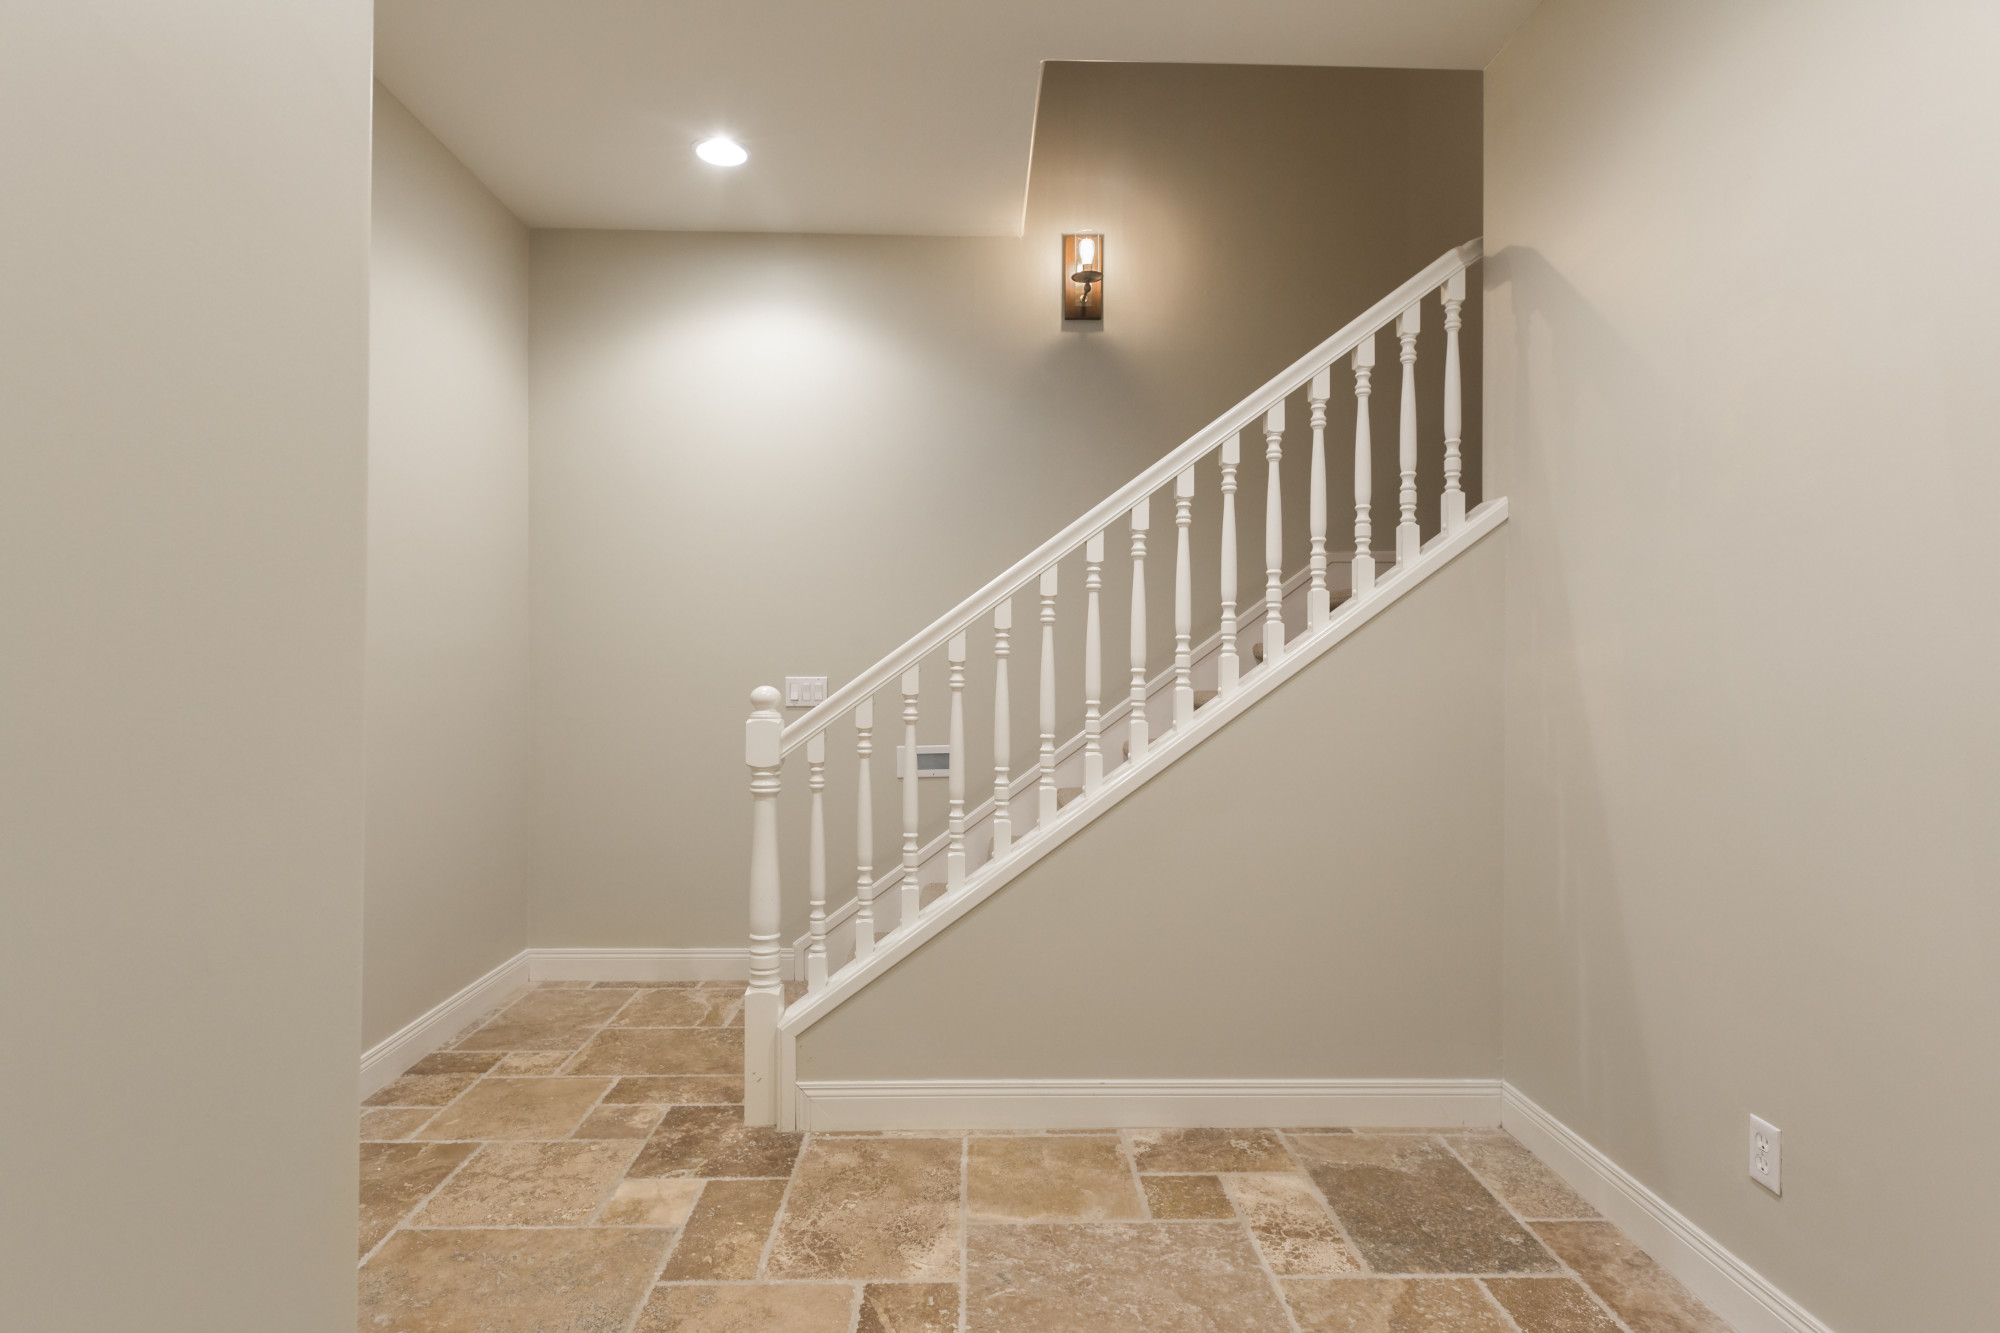 Which States Have the Most Houses with Basements?